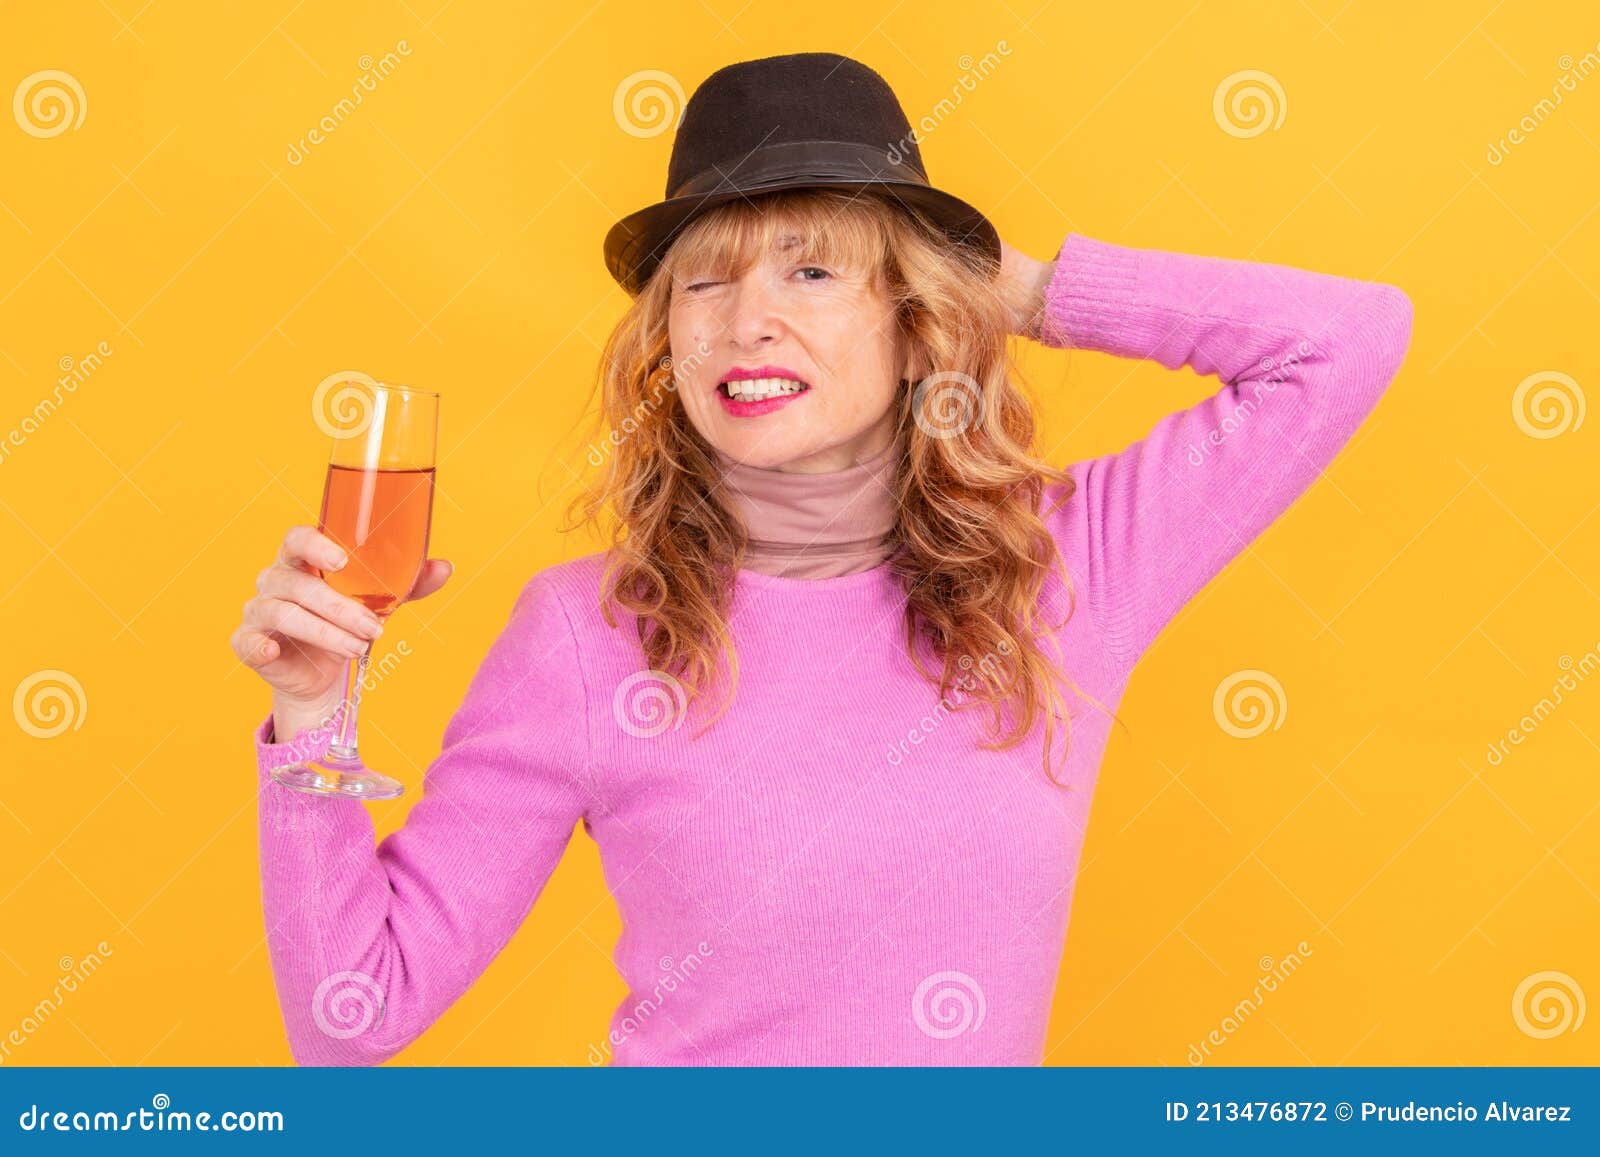 Adult Woman Smiling with Wine Glass Stock Photo - Image of copyspace ...